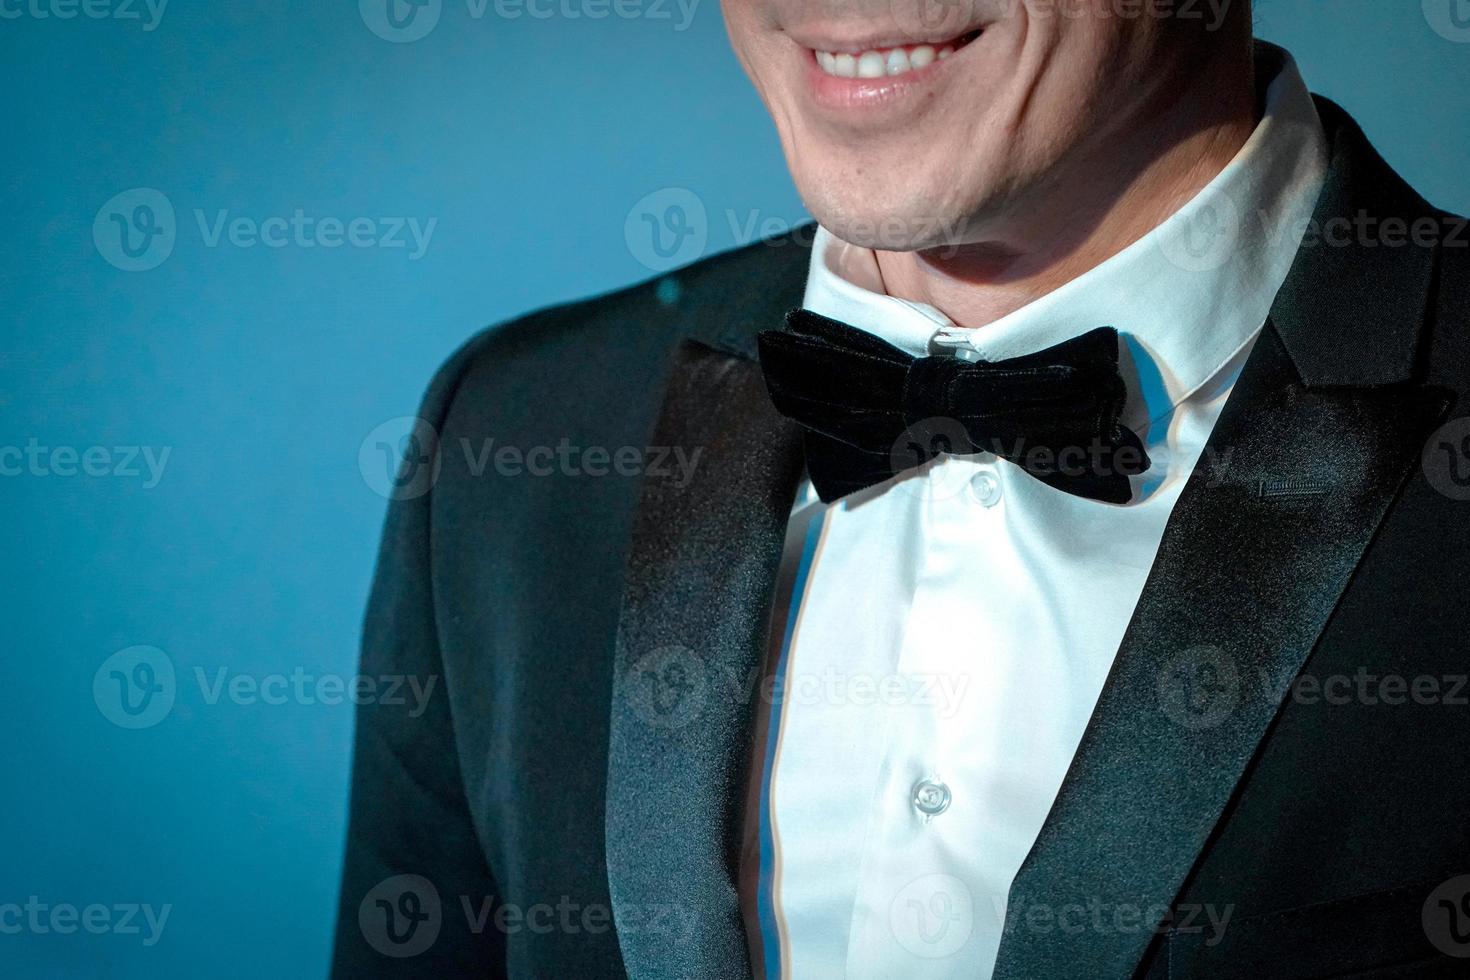 smart man smiling in taxido suit with bow tie on Turquoise background photo